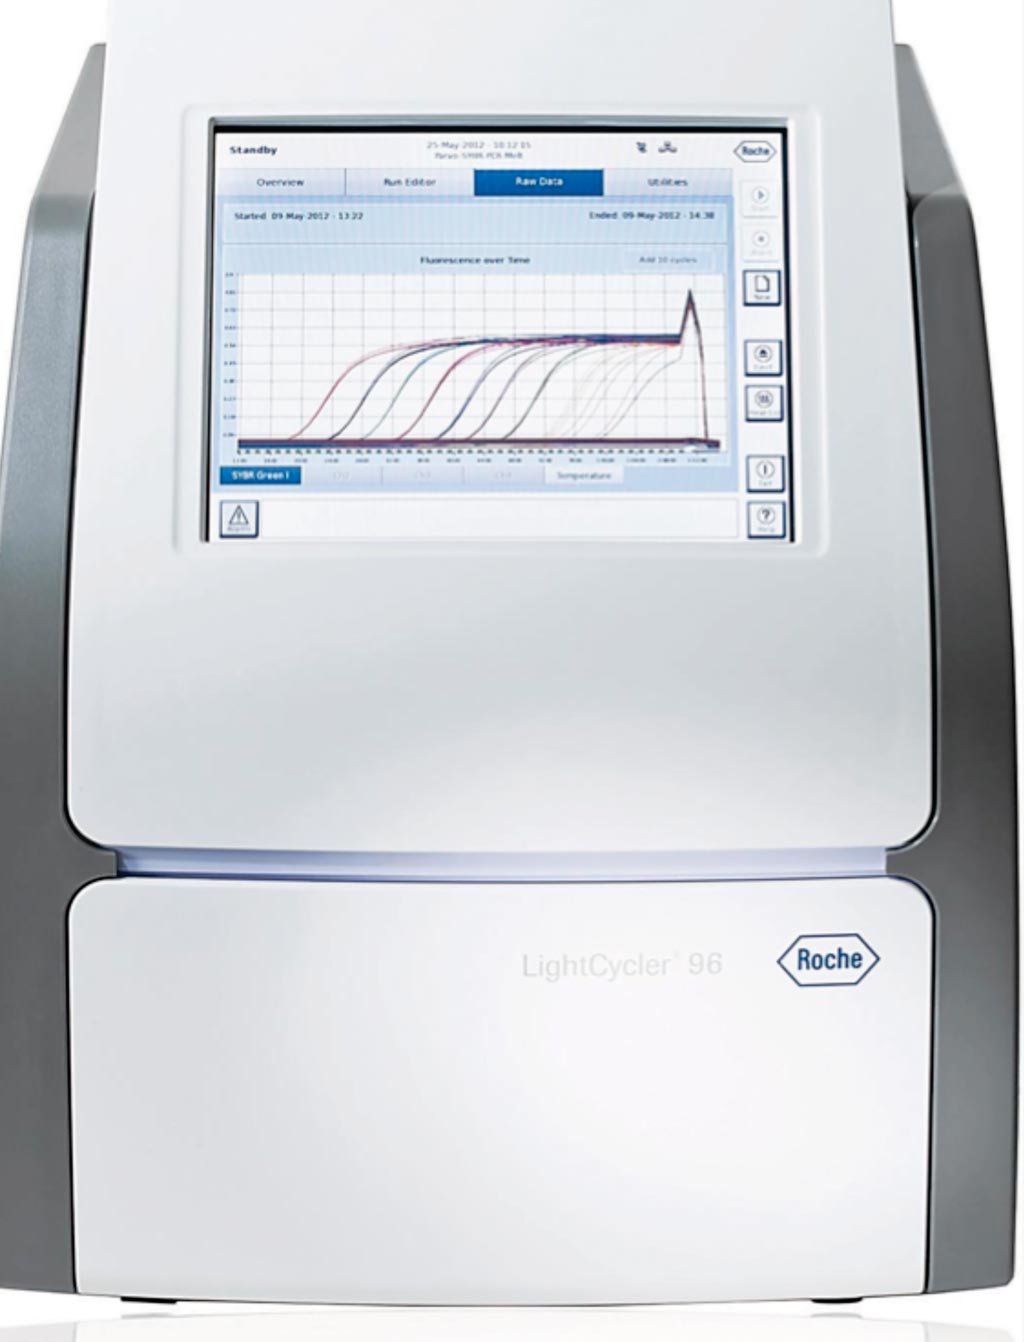 Image: The LightCycler 96 real-time PCR system (Photo courtesy of Roche Diagnostics).